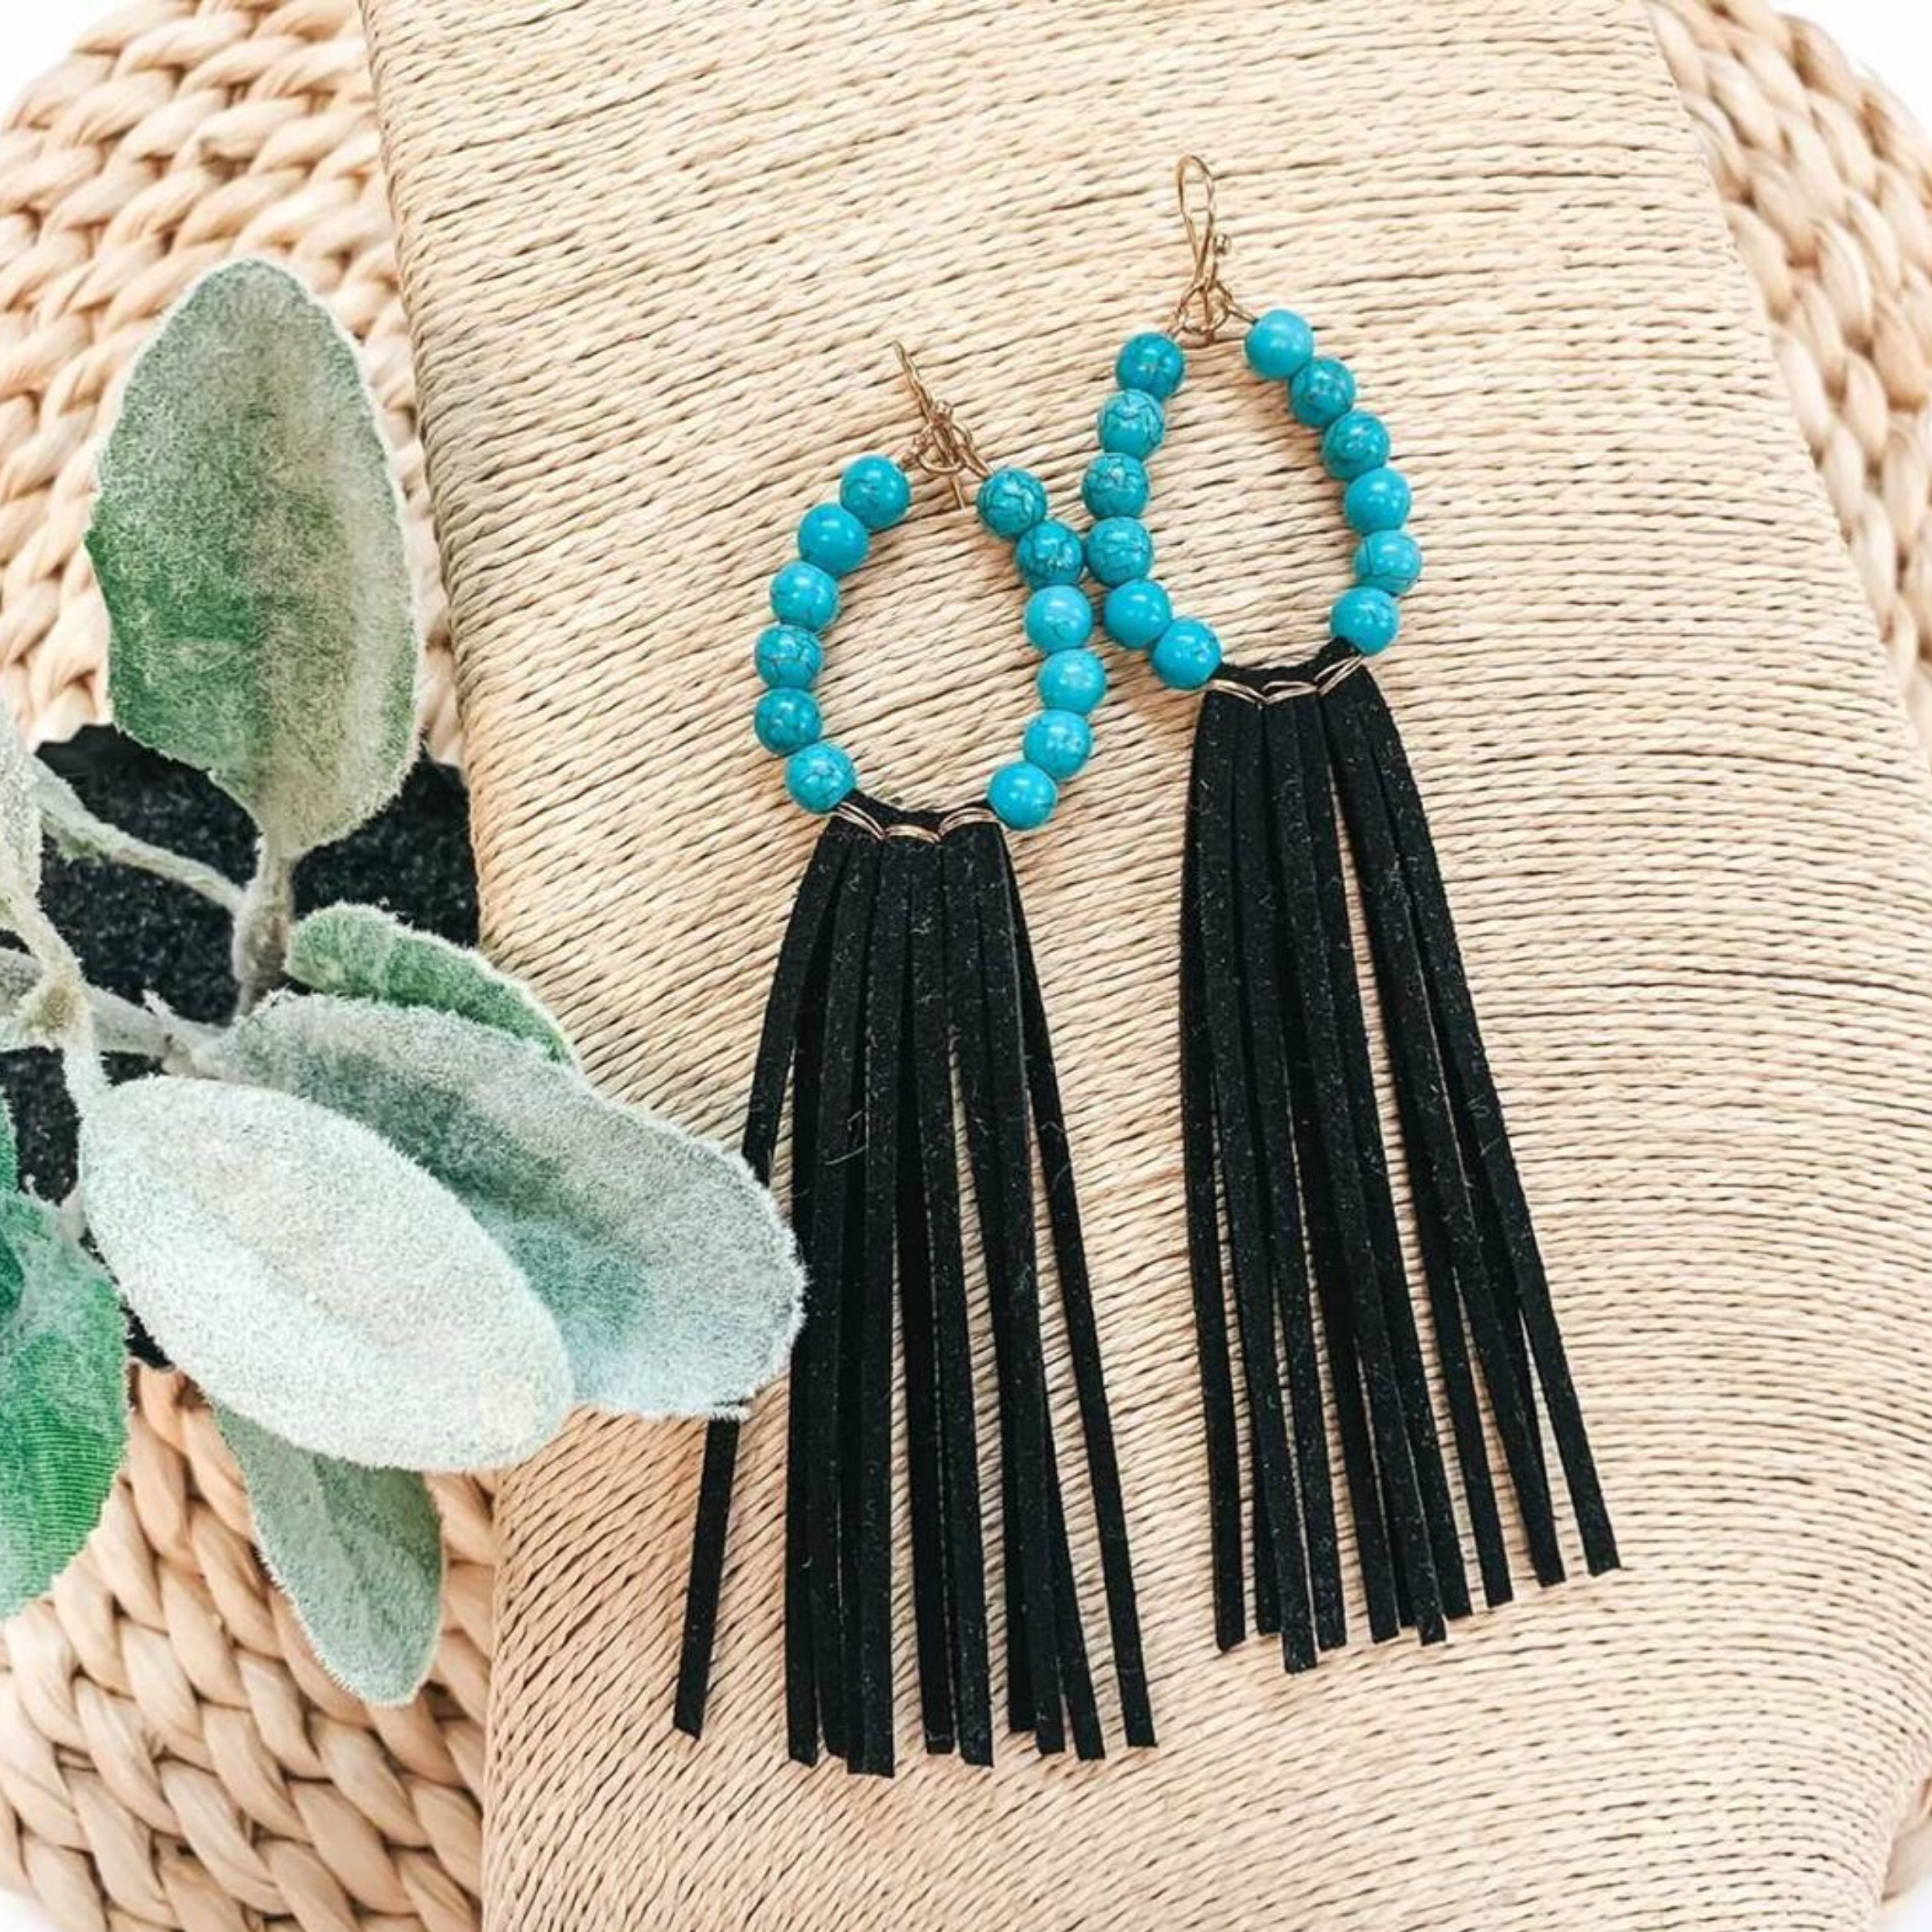 Turquoise Beaded Hoop Earrings with Black Tassels - Giddy Up Glamour Boutique